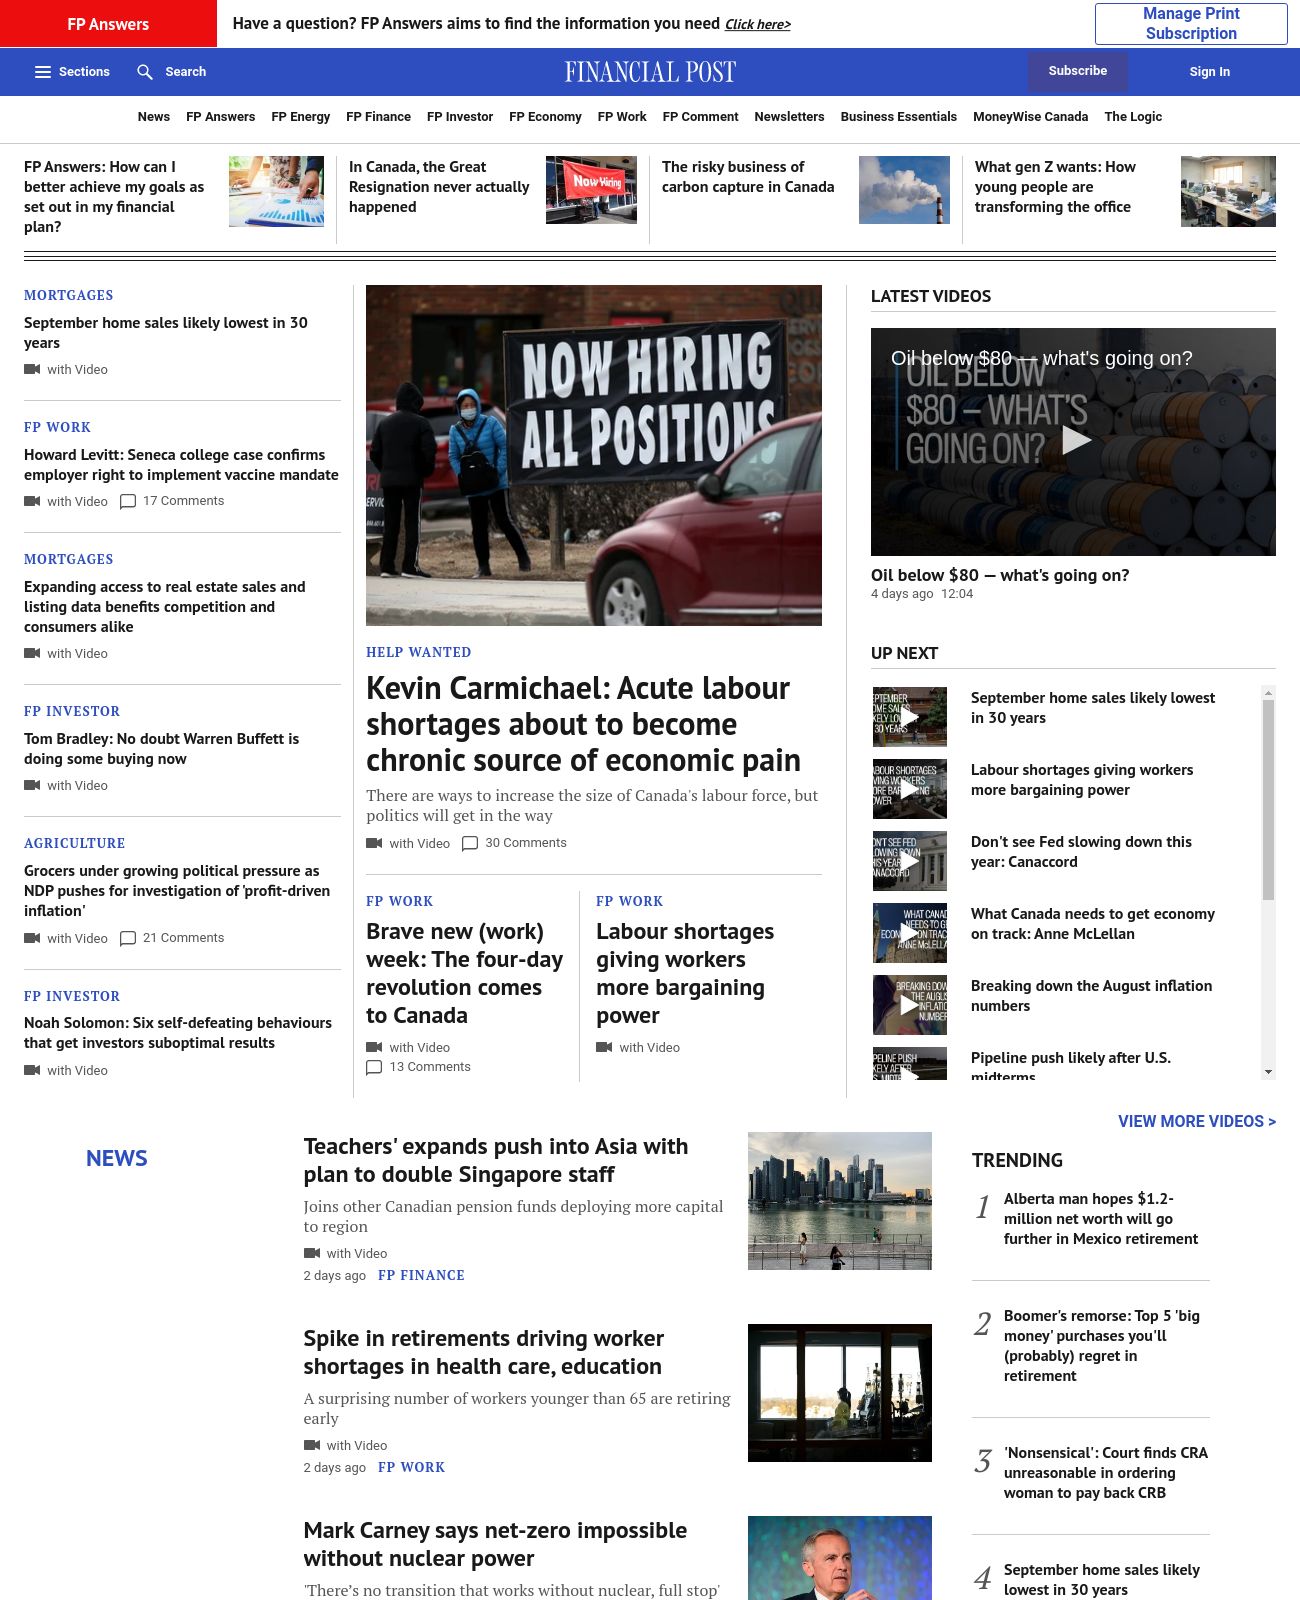 Financial Post at 2022-10-03 02:04:53-04:00 local time